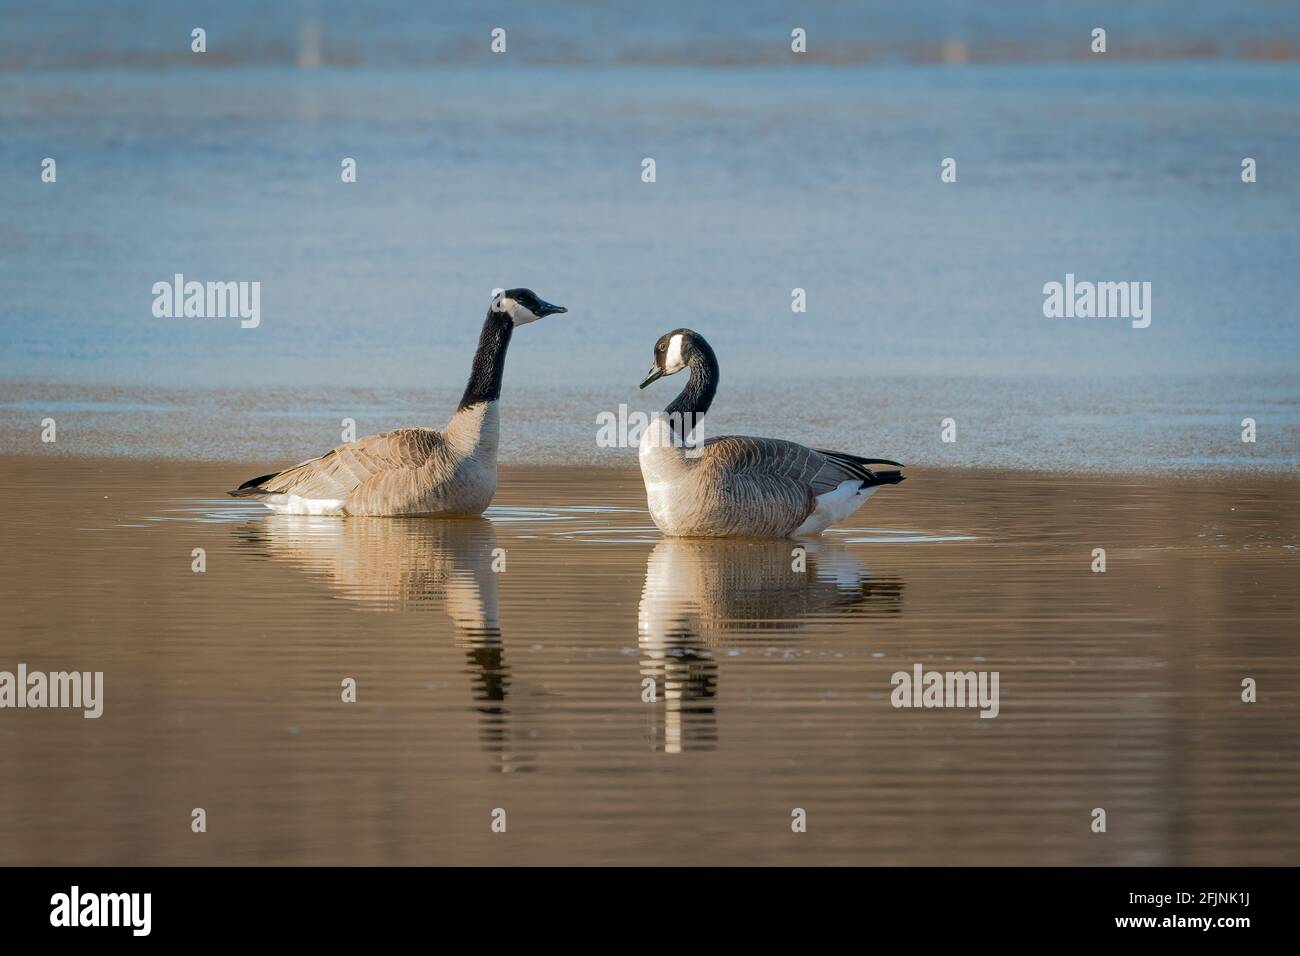 Two Canada geese share an early morning spring sunrise moment on a small pond in a sand and gravel pit in Door County Wisconsin. Stock Photo